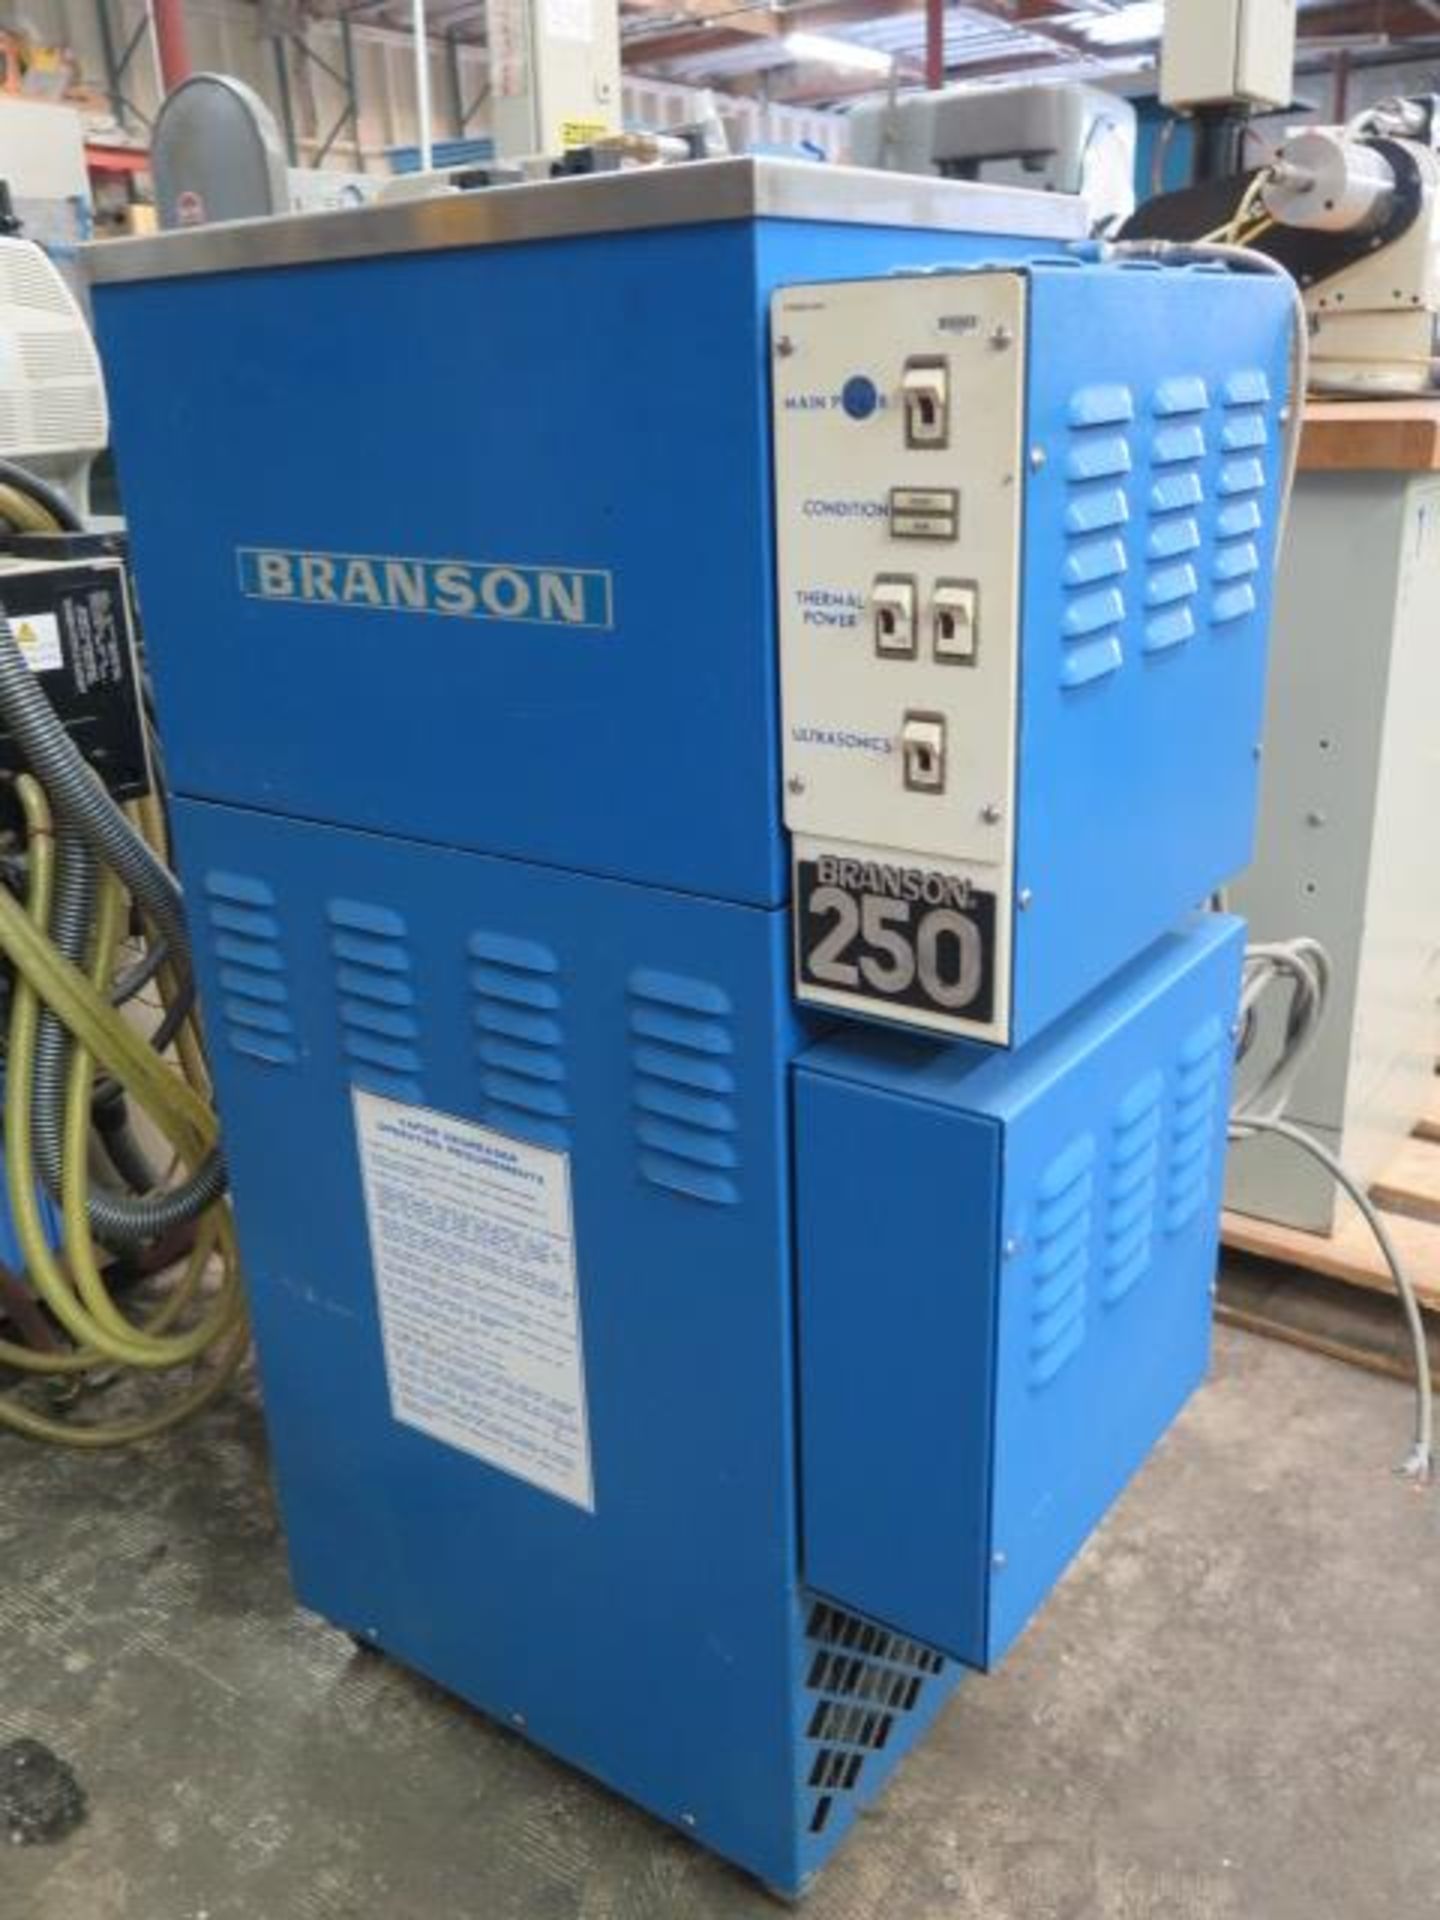 Branson B-250-RS Ultrasonic Cleaning System s/n 5-0516-84 (SOLD AS-IS - NO WARRANTY) - Image 2 of 6